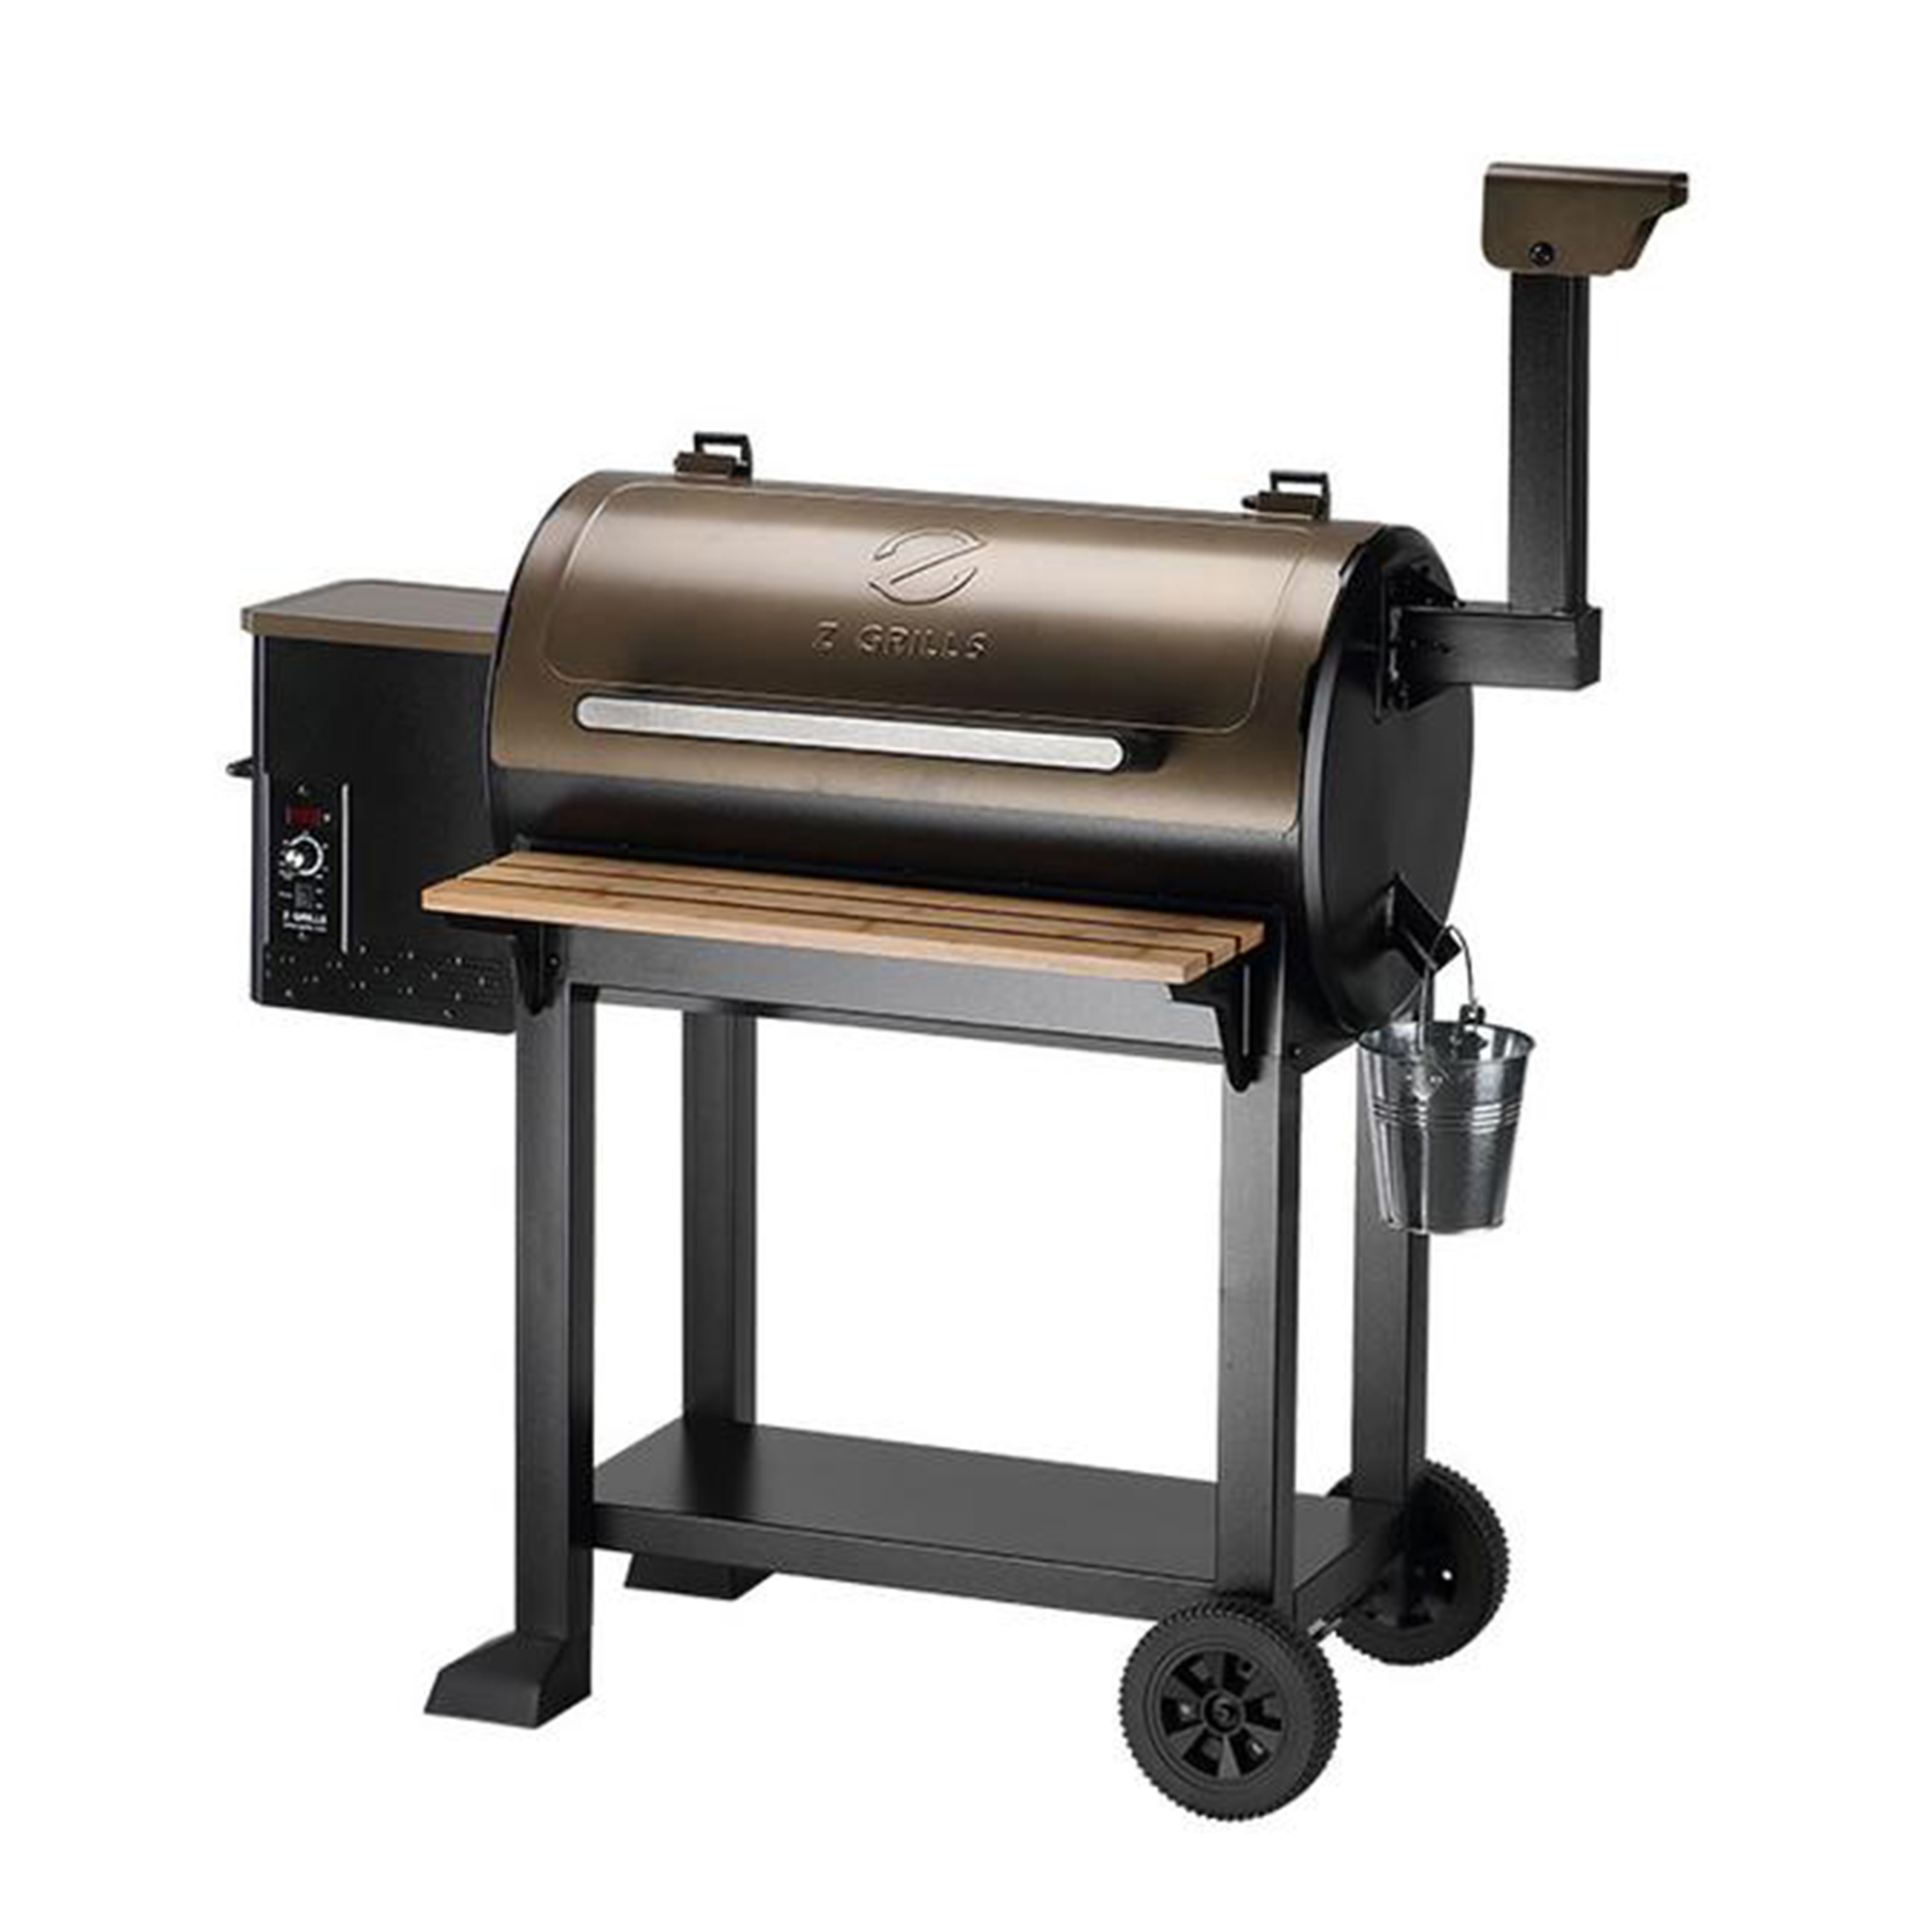 Z GRILLS Wood Pellet Grill and Electric Smoker w/ Auto Temperature Control - image 1 of 6